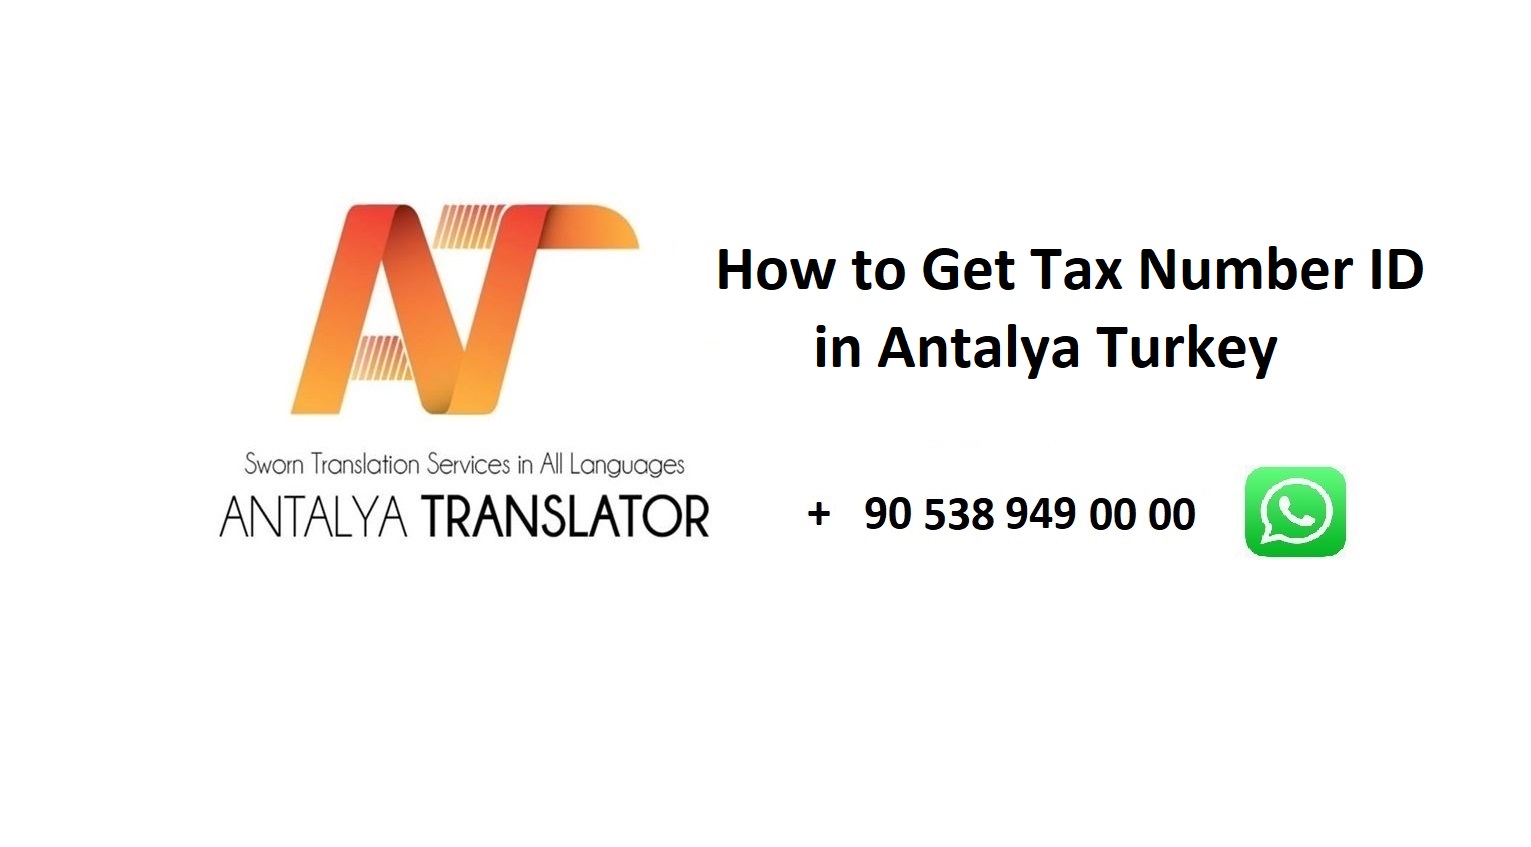 How to Get Tax Number ID in Antalya Turkey